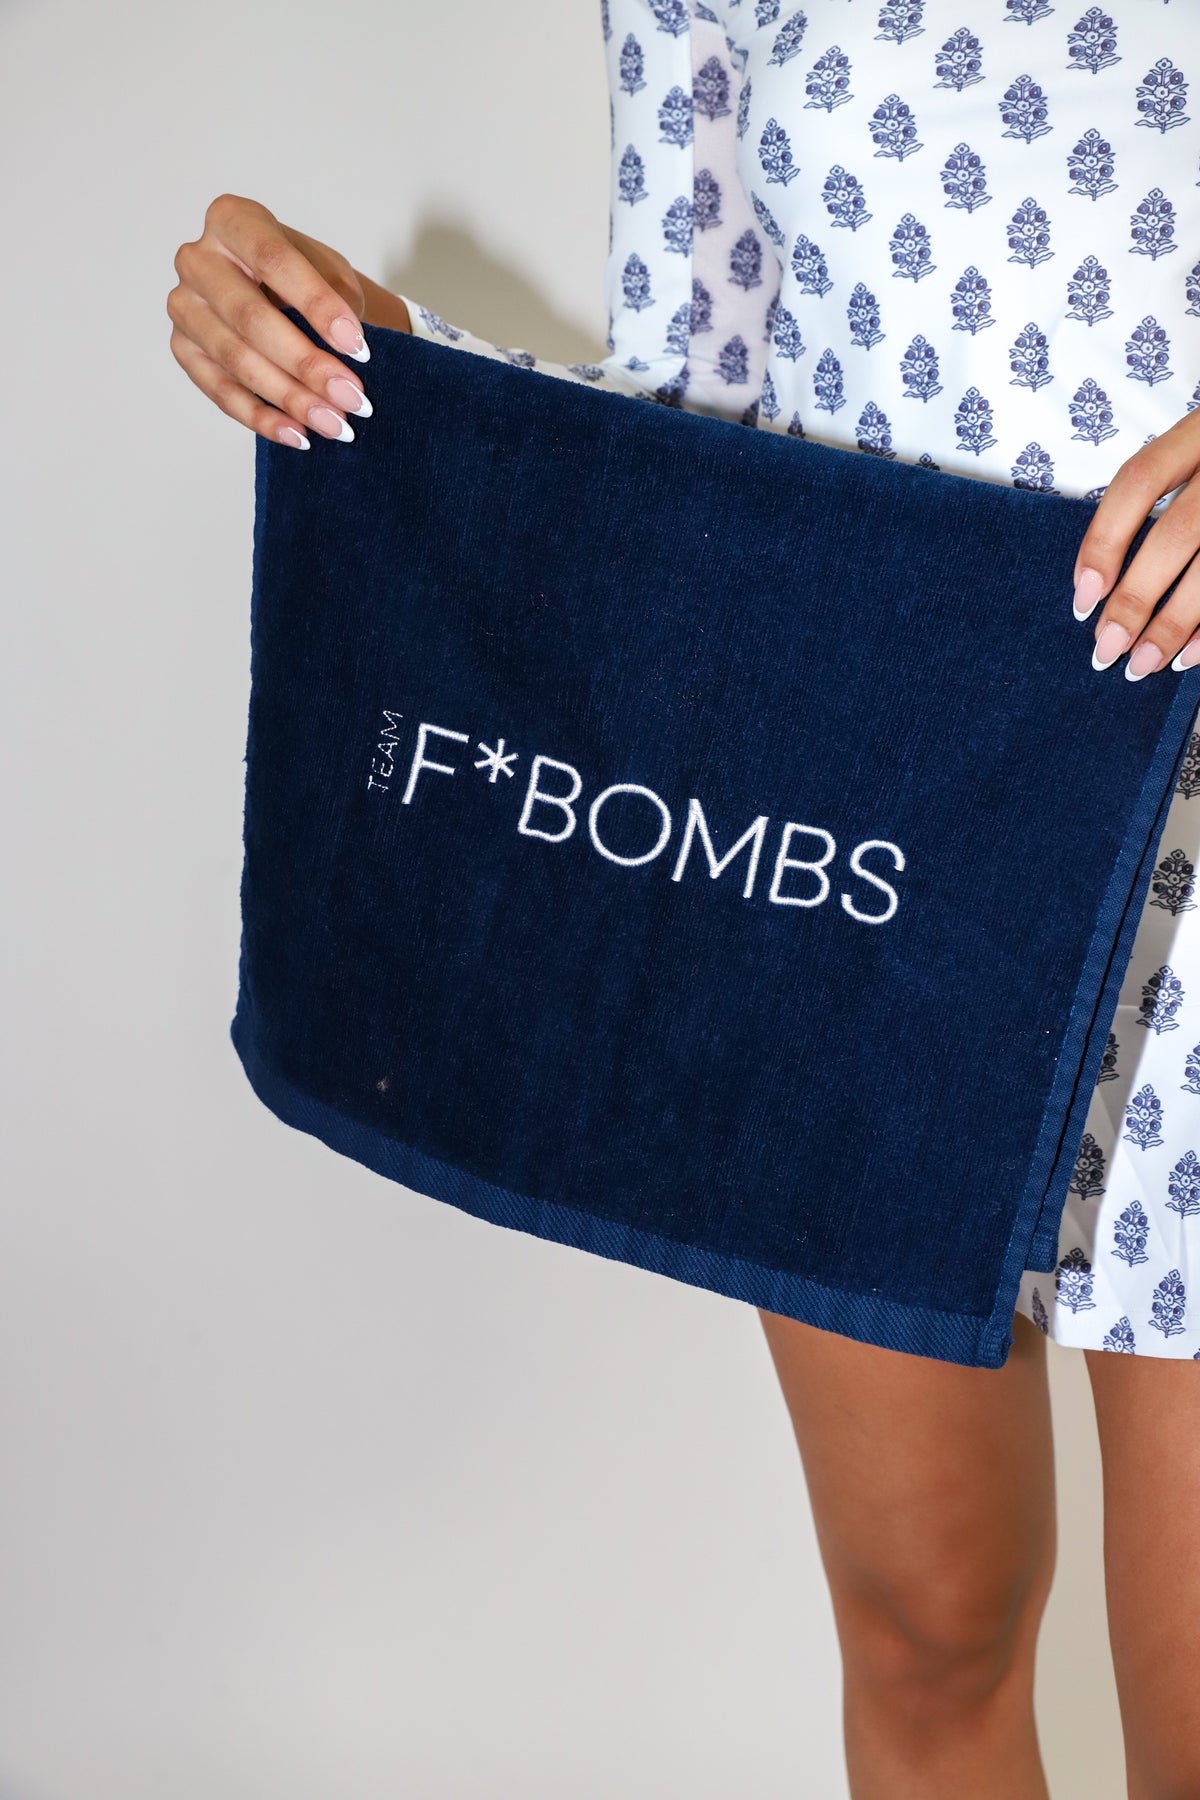 F*BOMBS Towel With Grommet